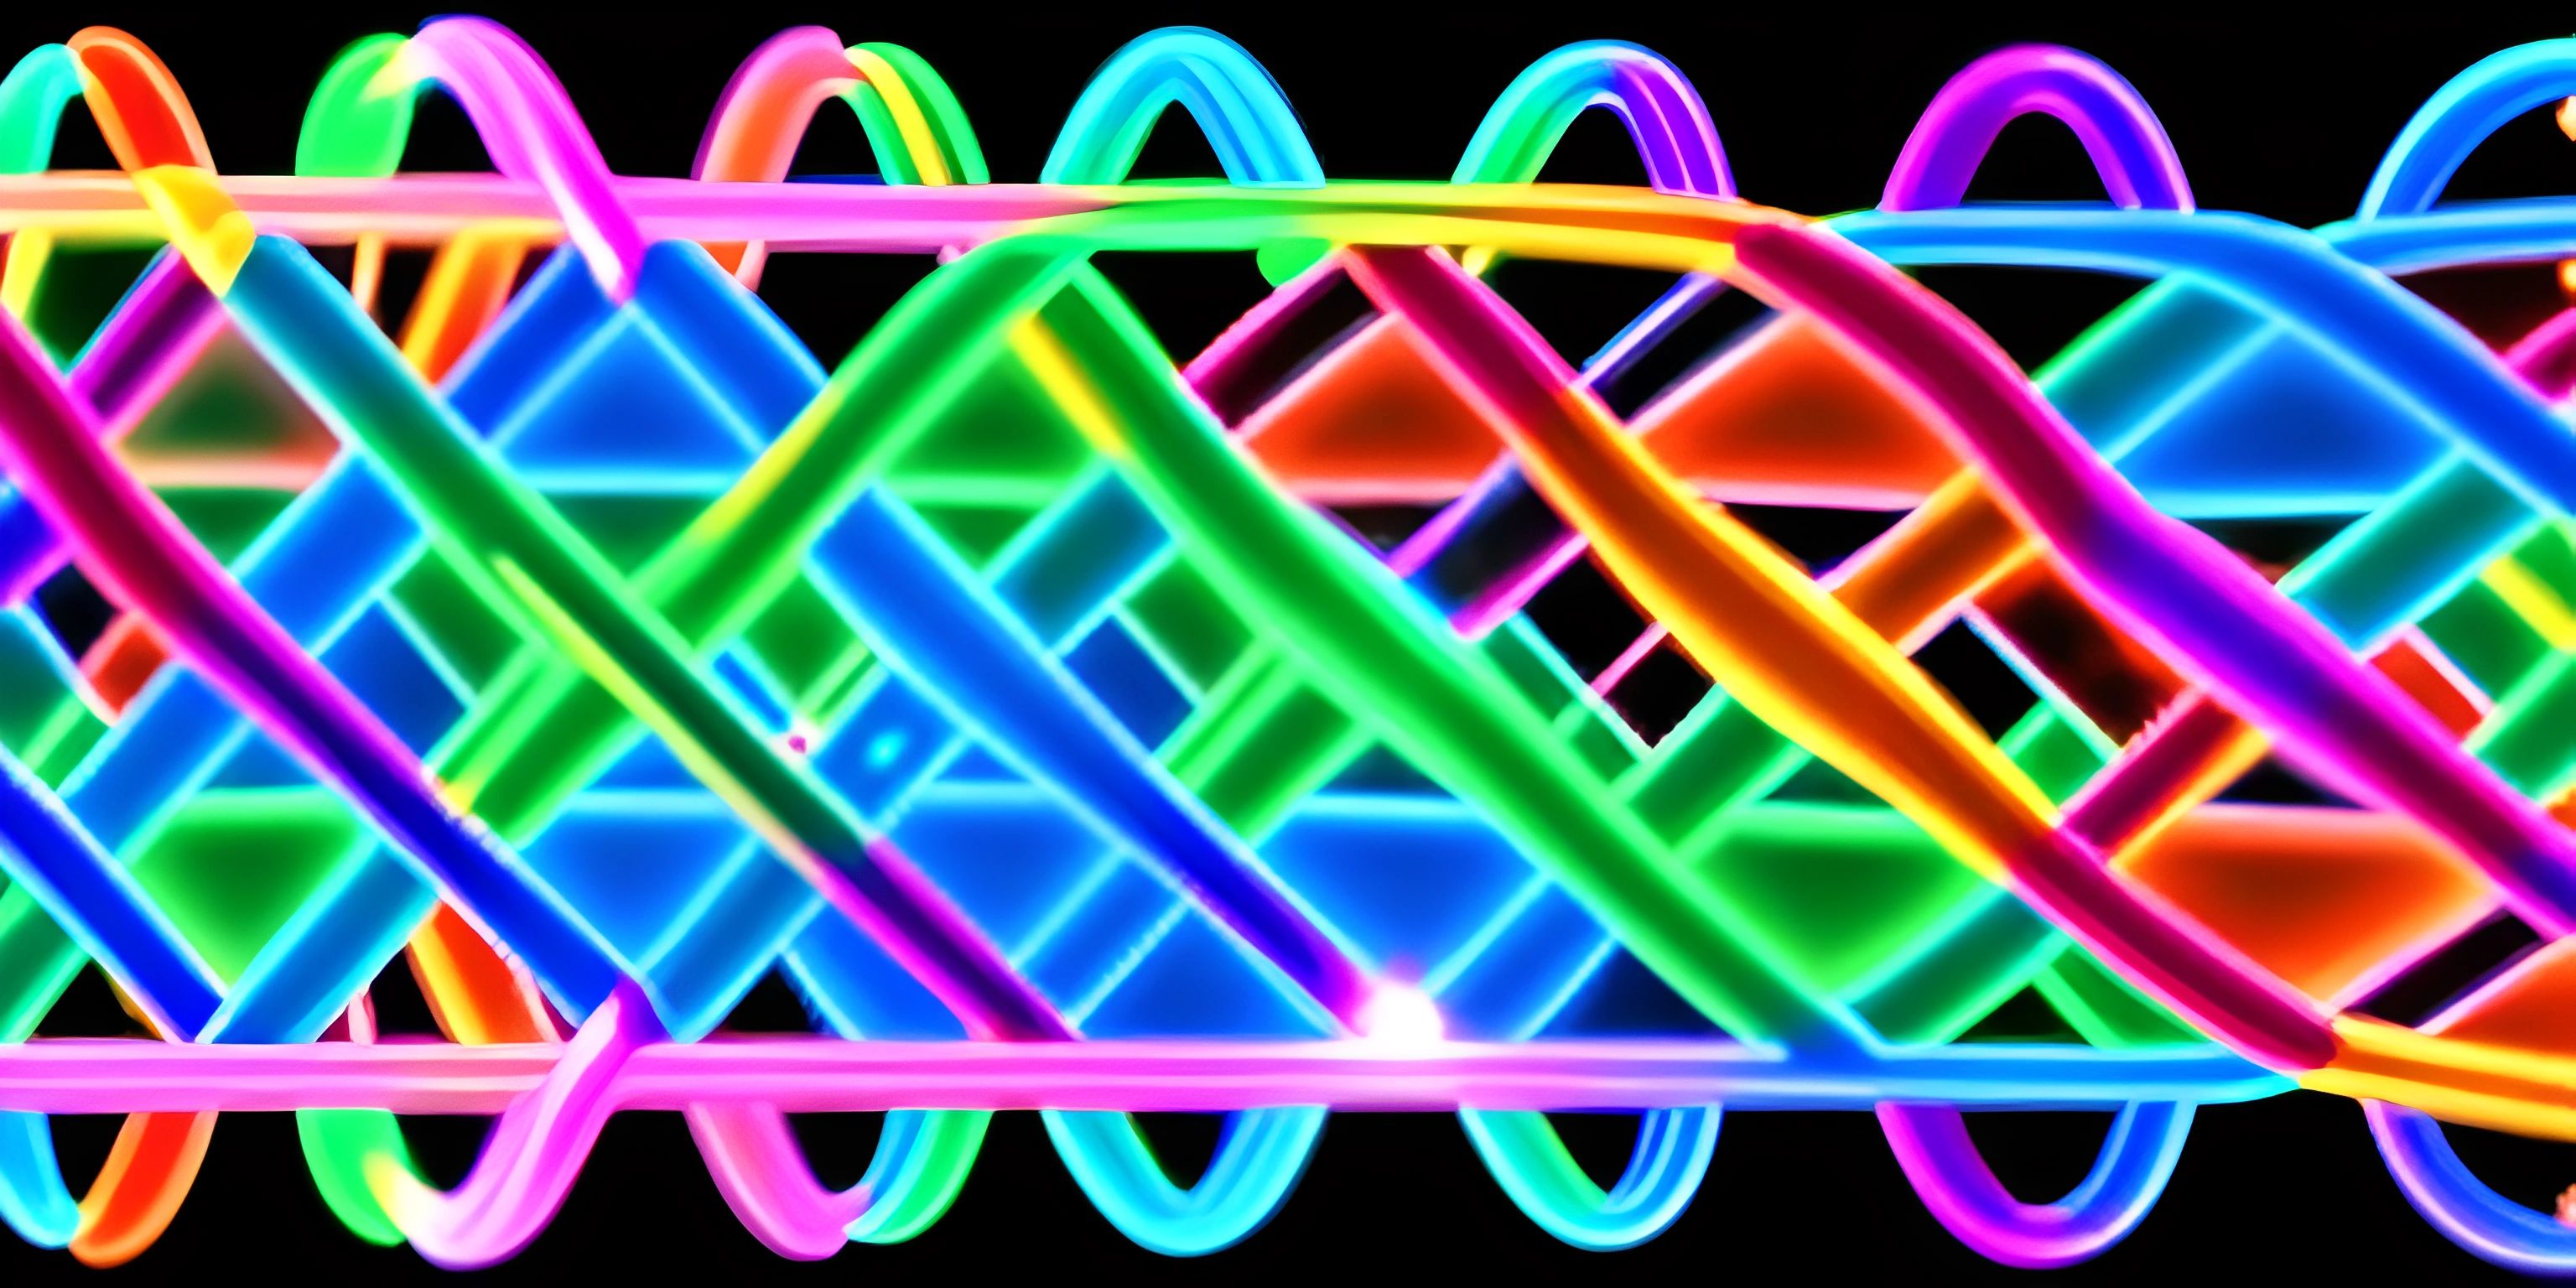 a long pattern made of many different colored lines on a black background with a light shining through it